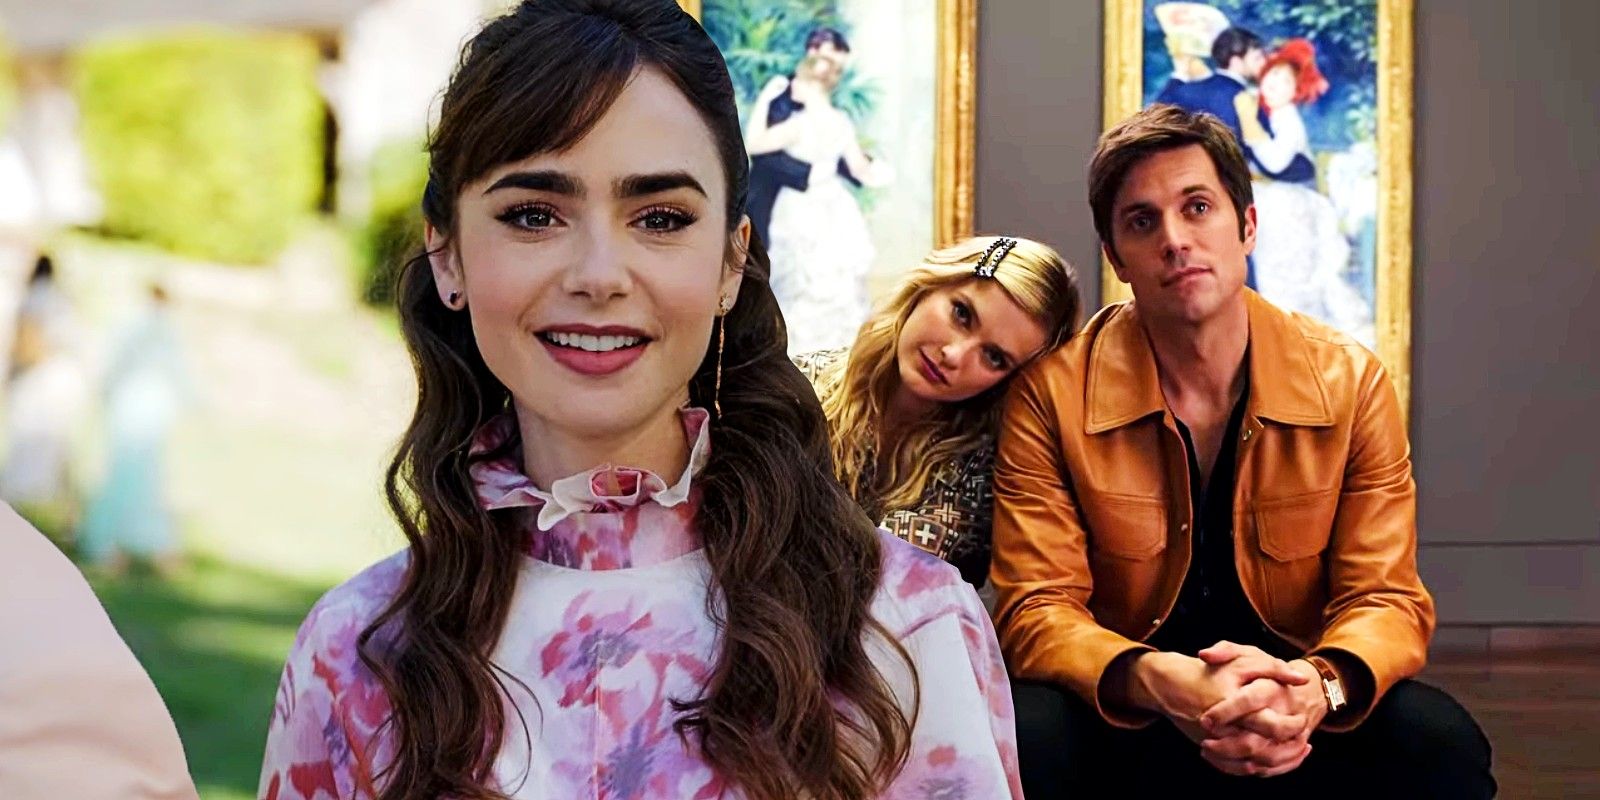 Lily Collins as Emily, Camille Razat as Camille and Lucas Bravo as Gabriel in Emily in Paris season 3